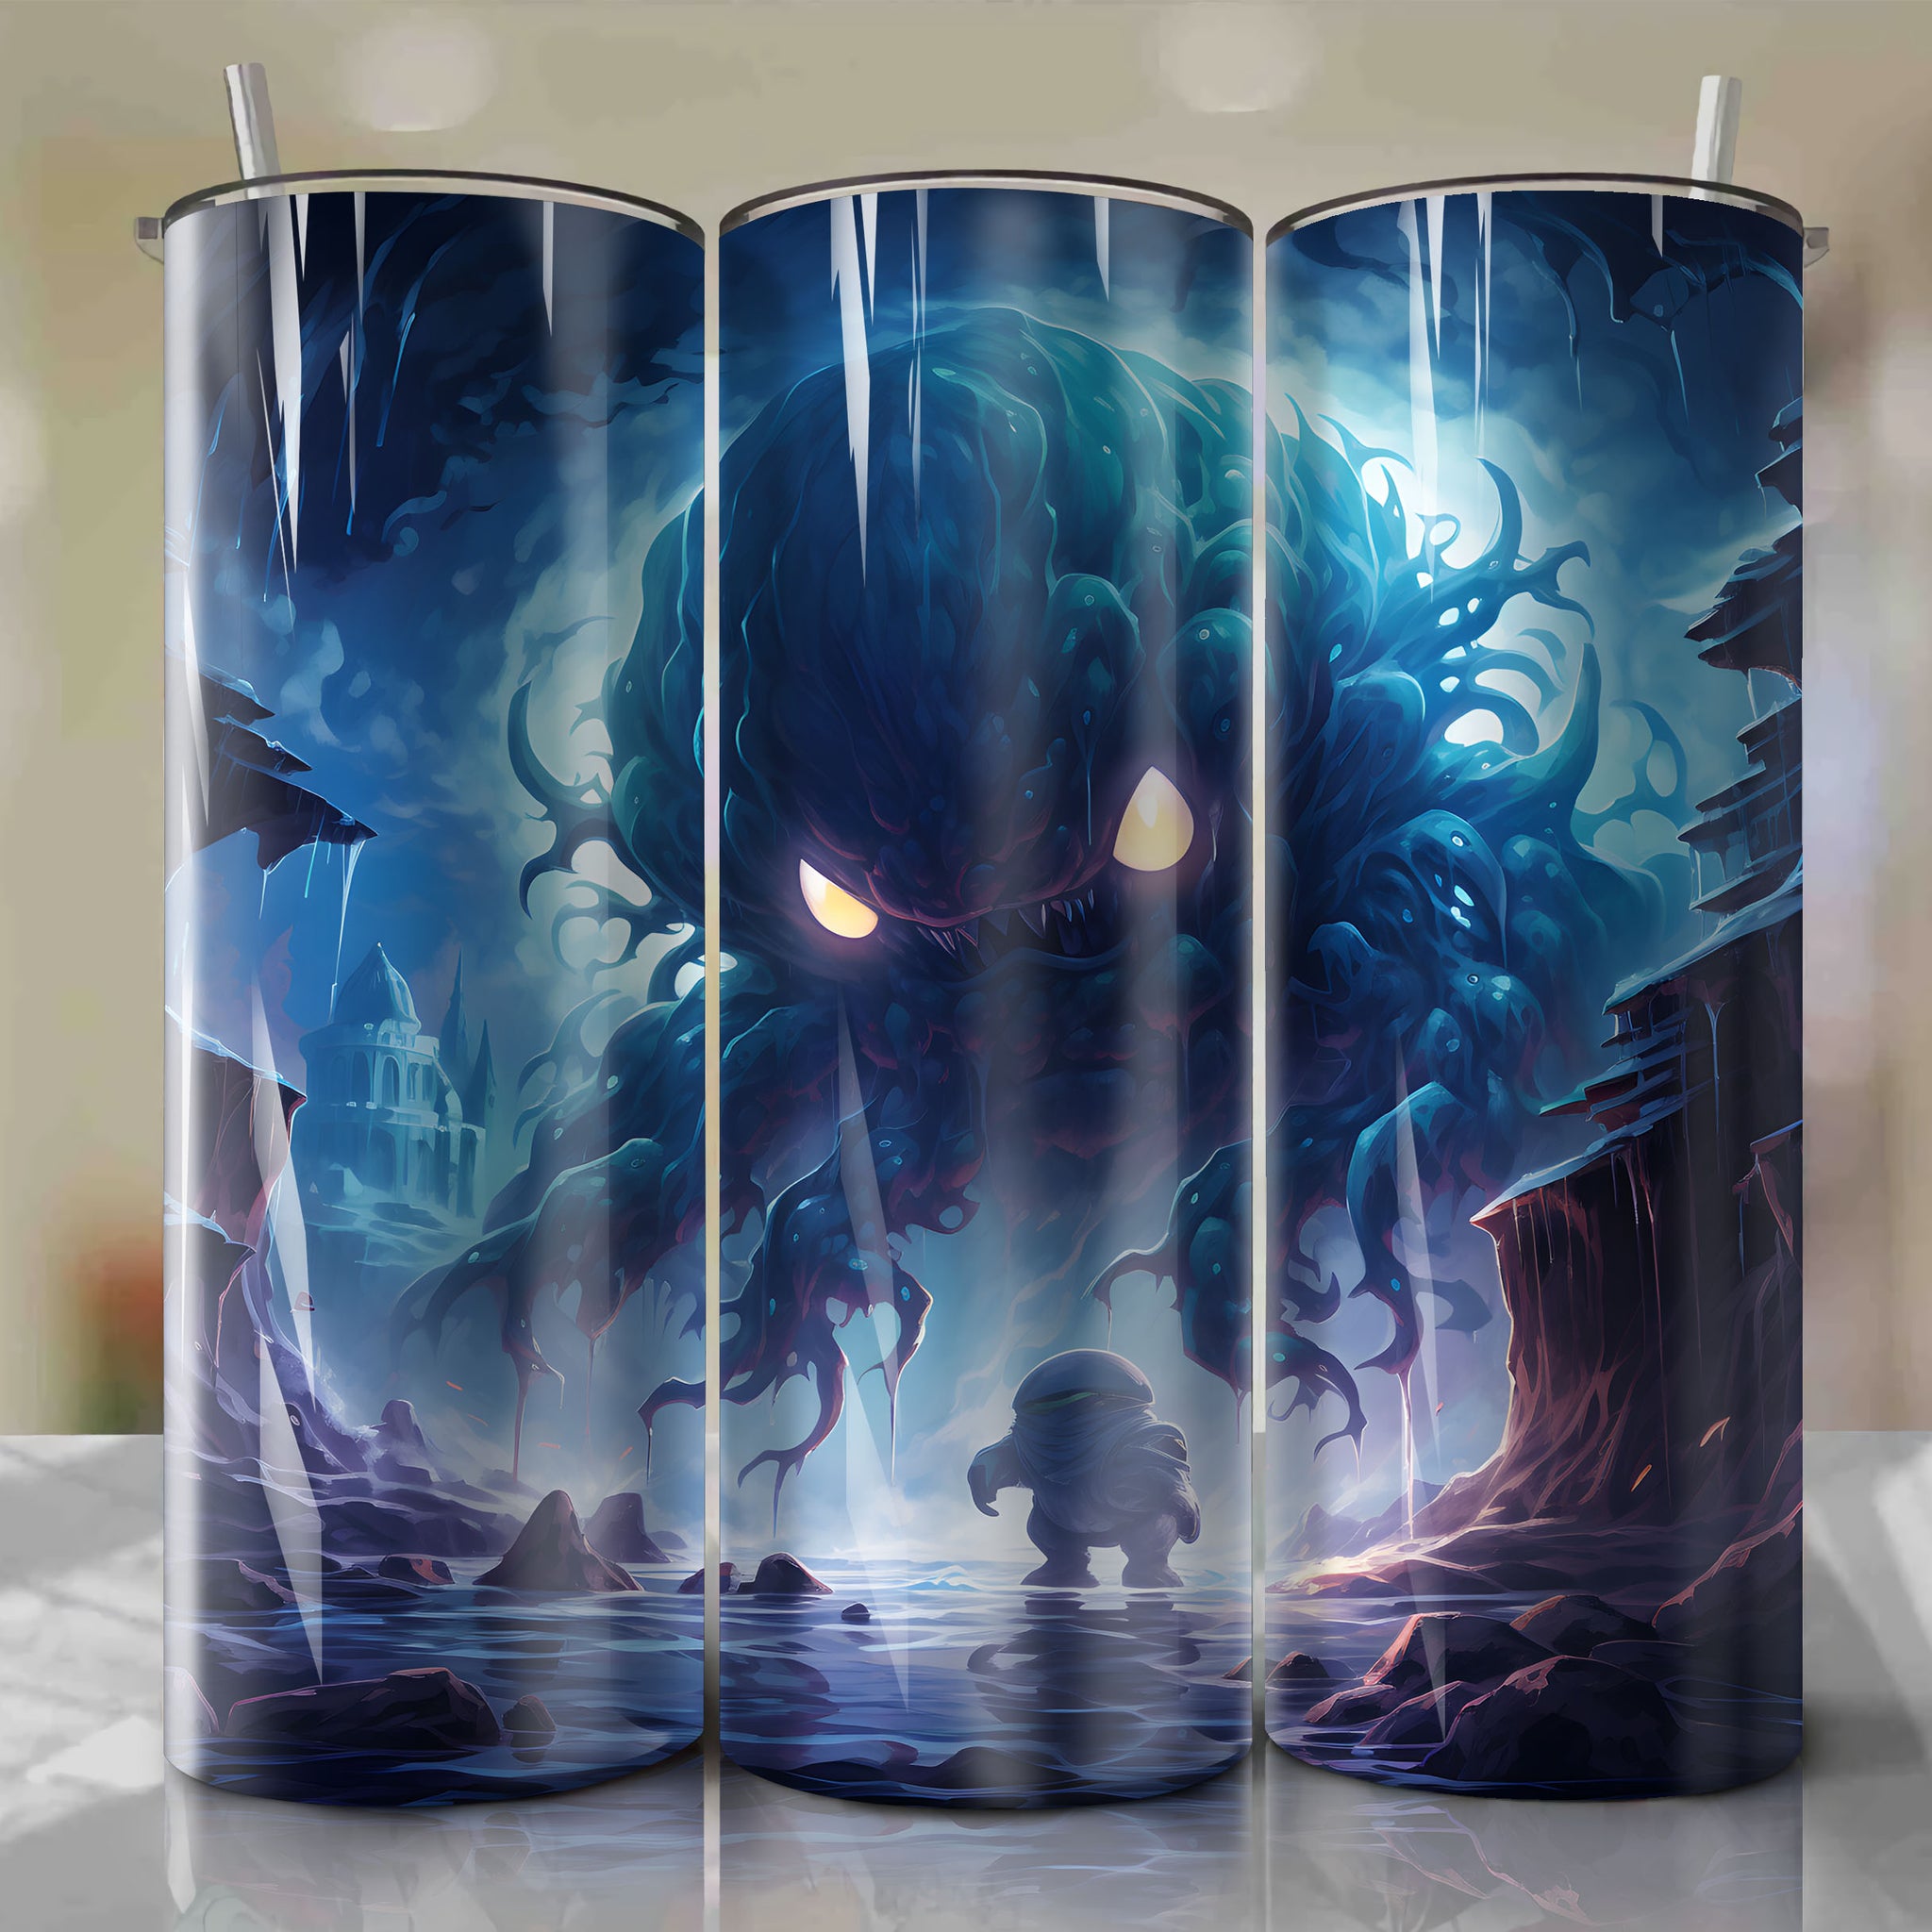 20 Oz Tumbler Wrap - A Majestic Artistic Masterpiece of Cloyster on a Frozen Cliff
